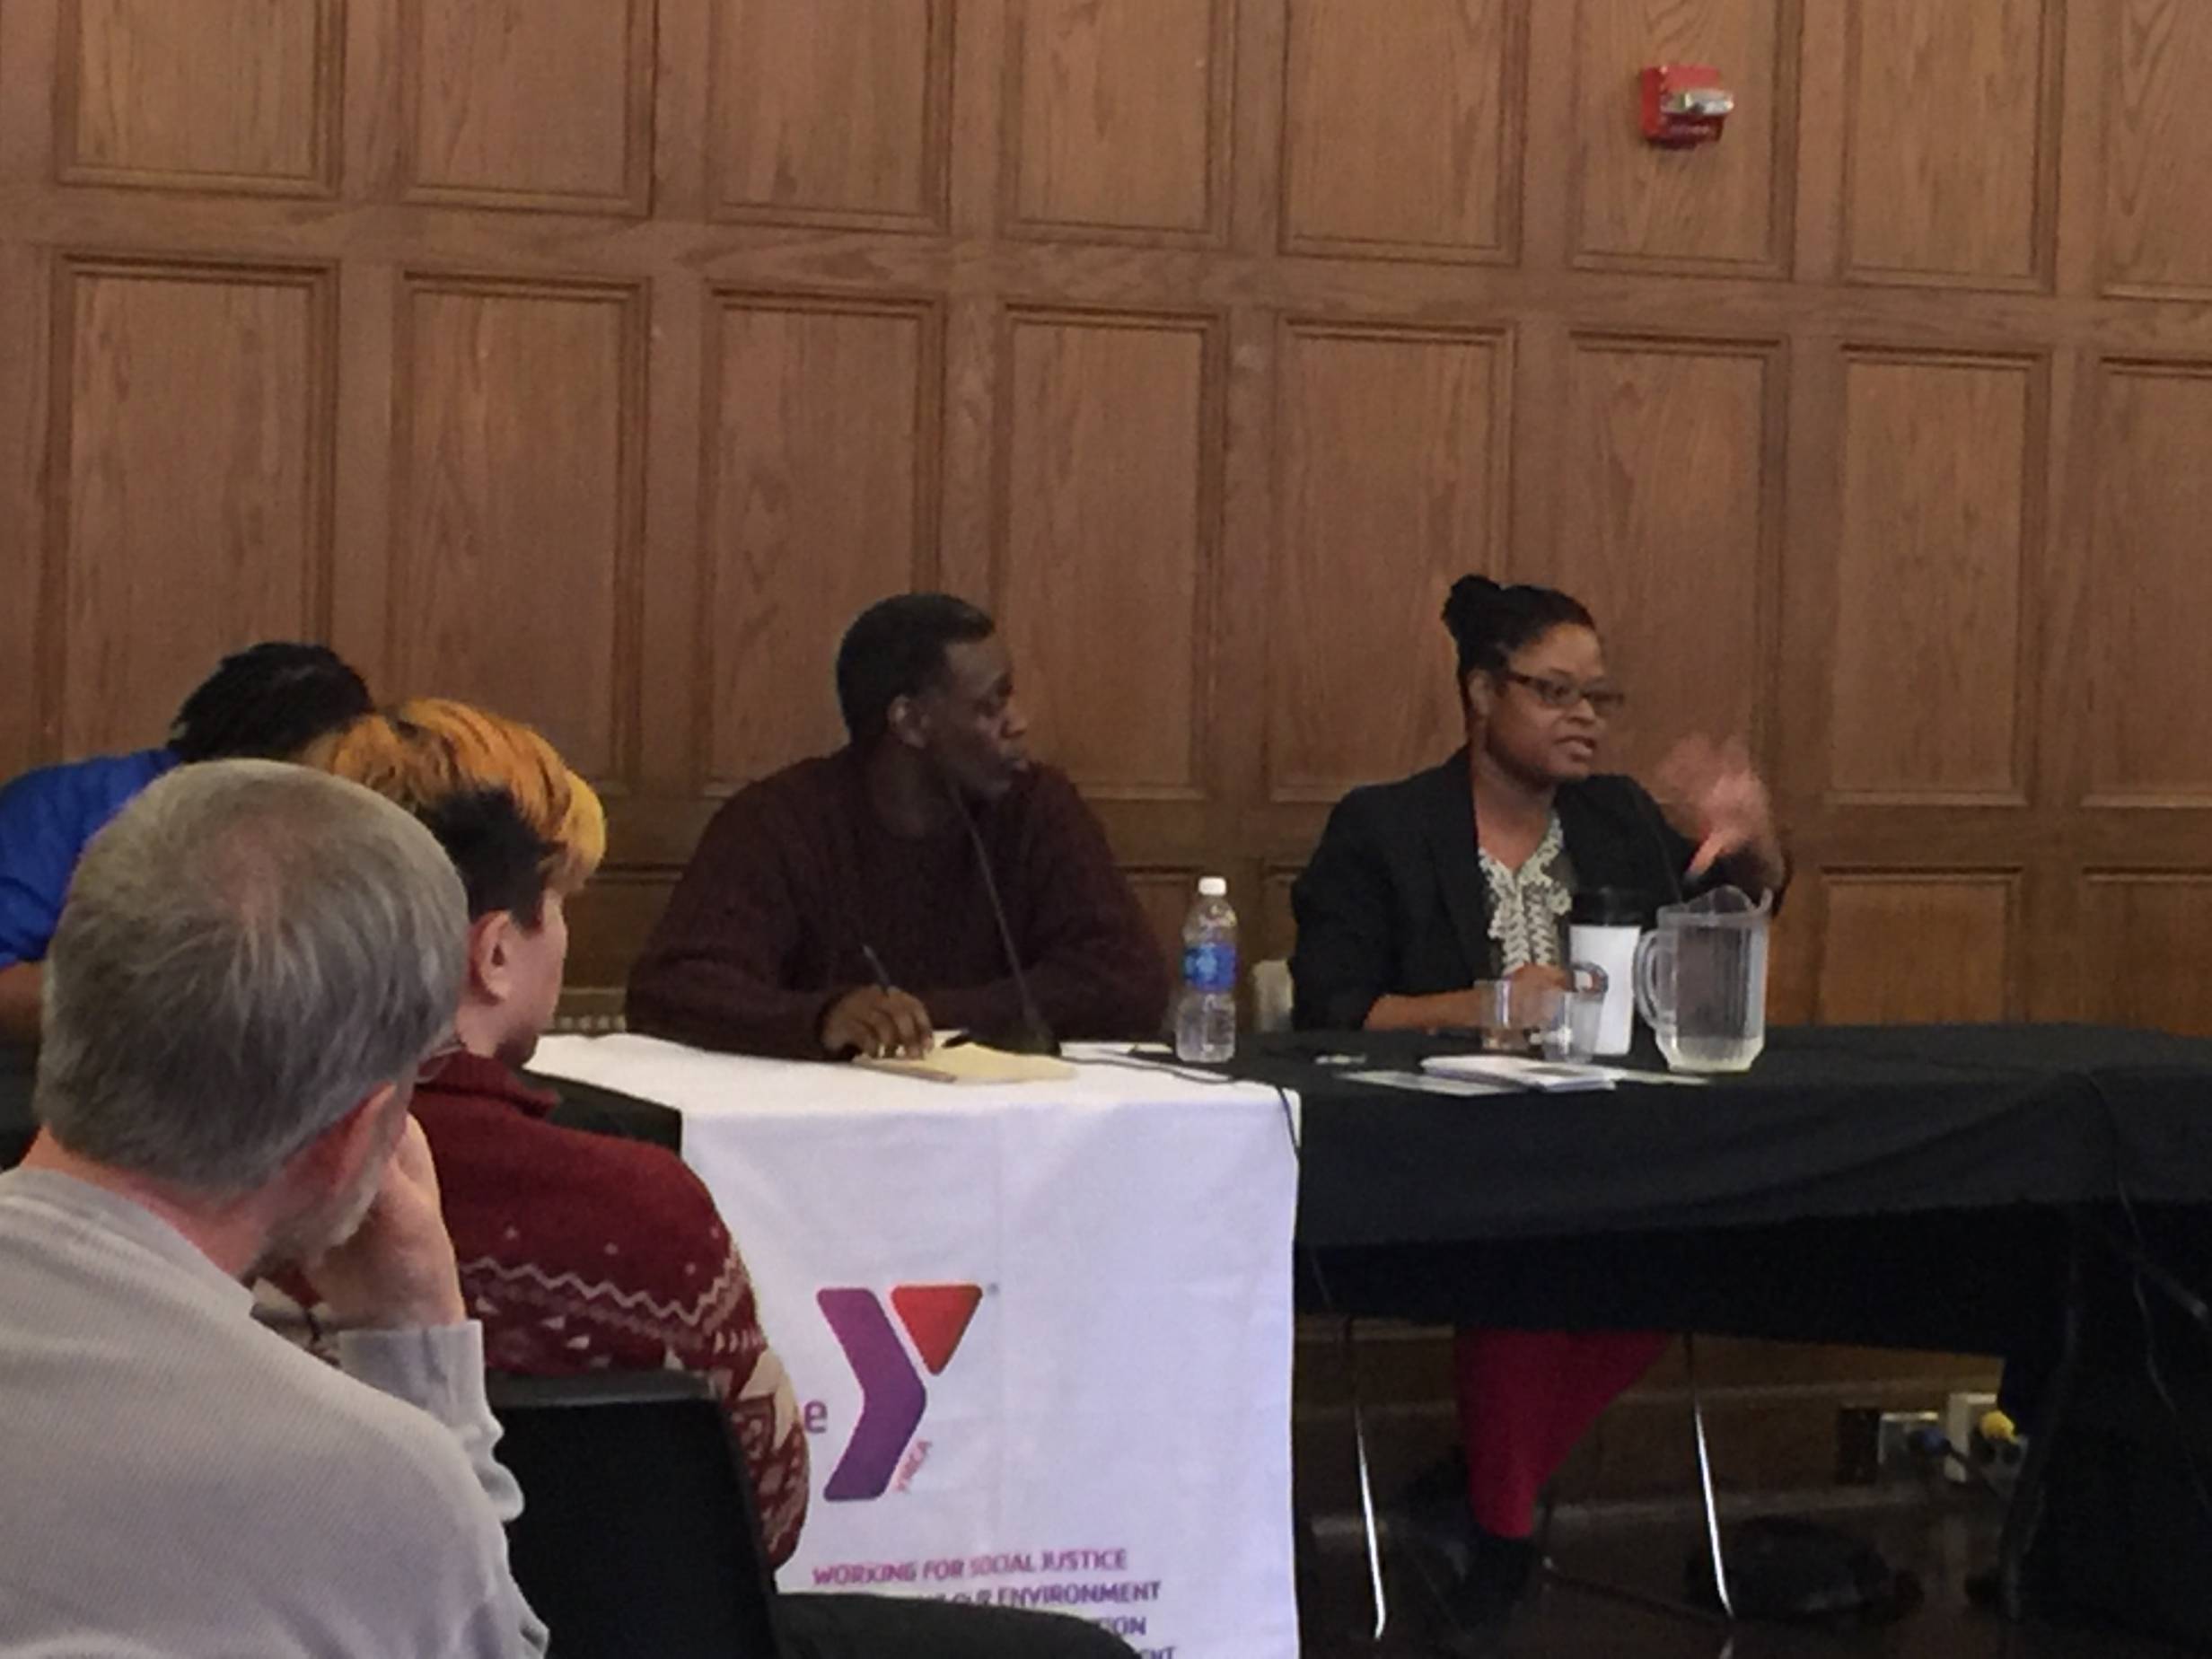 Friday Forum: “Panel on Local Efforts for Racial Justice” at University YMCA